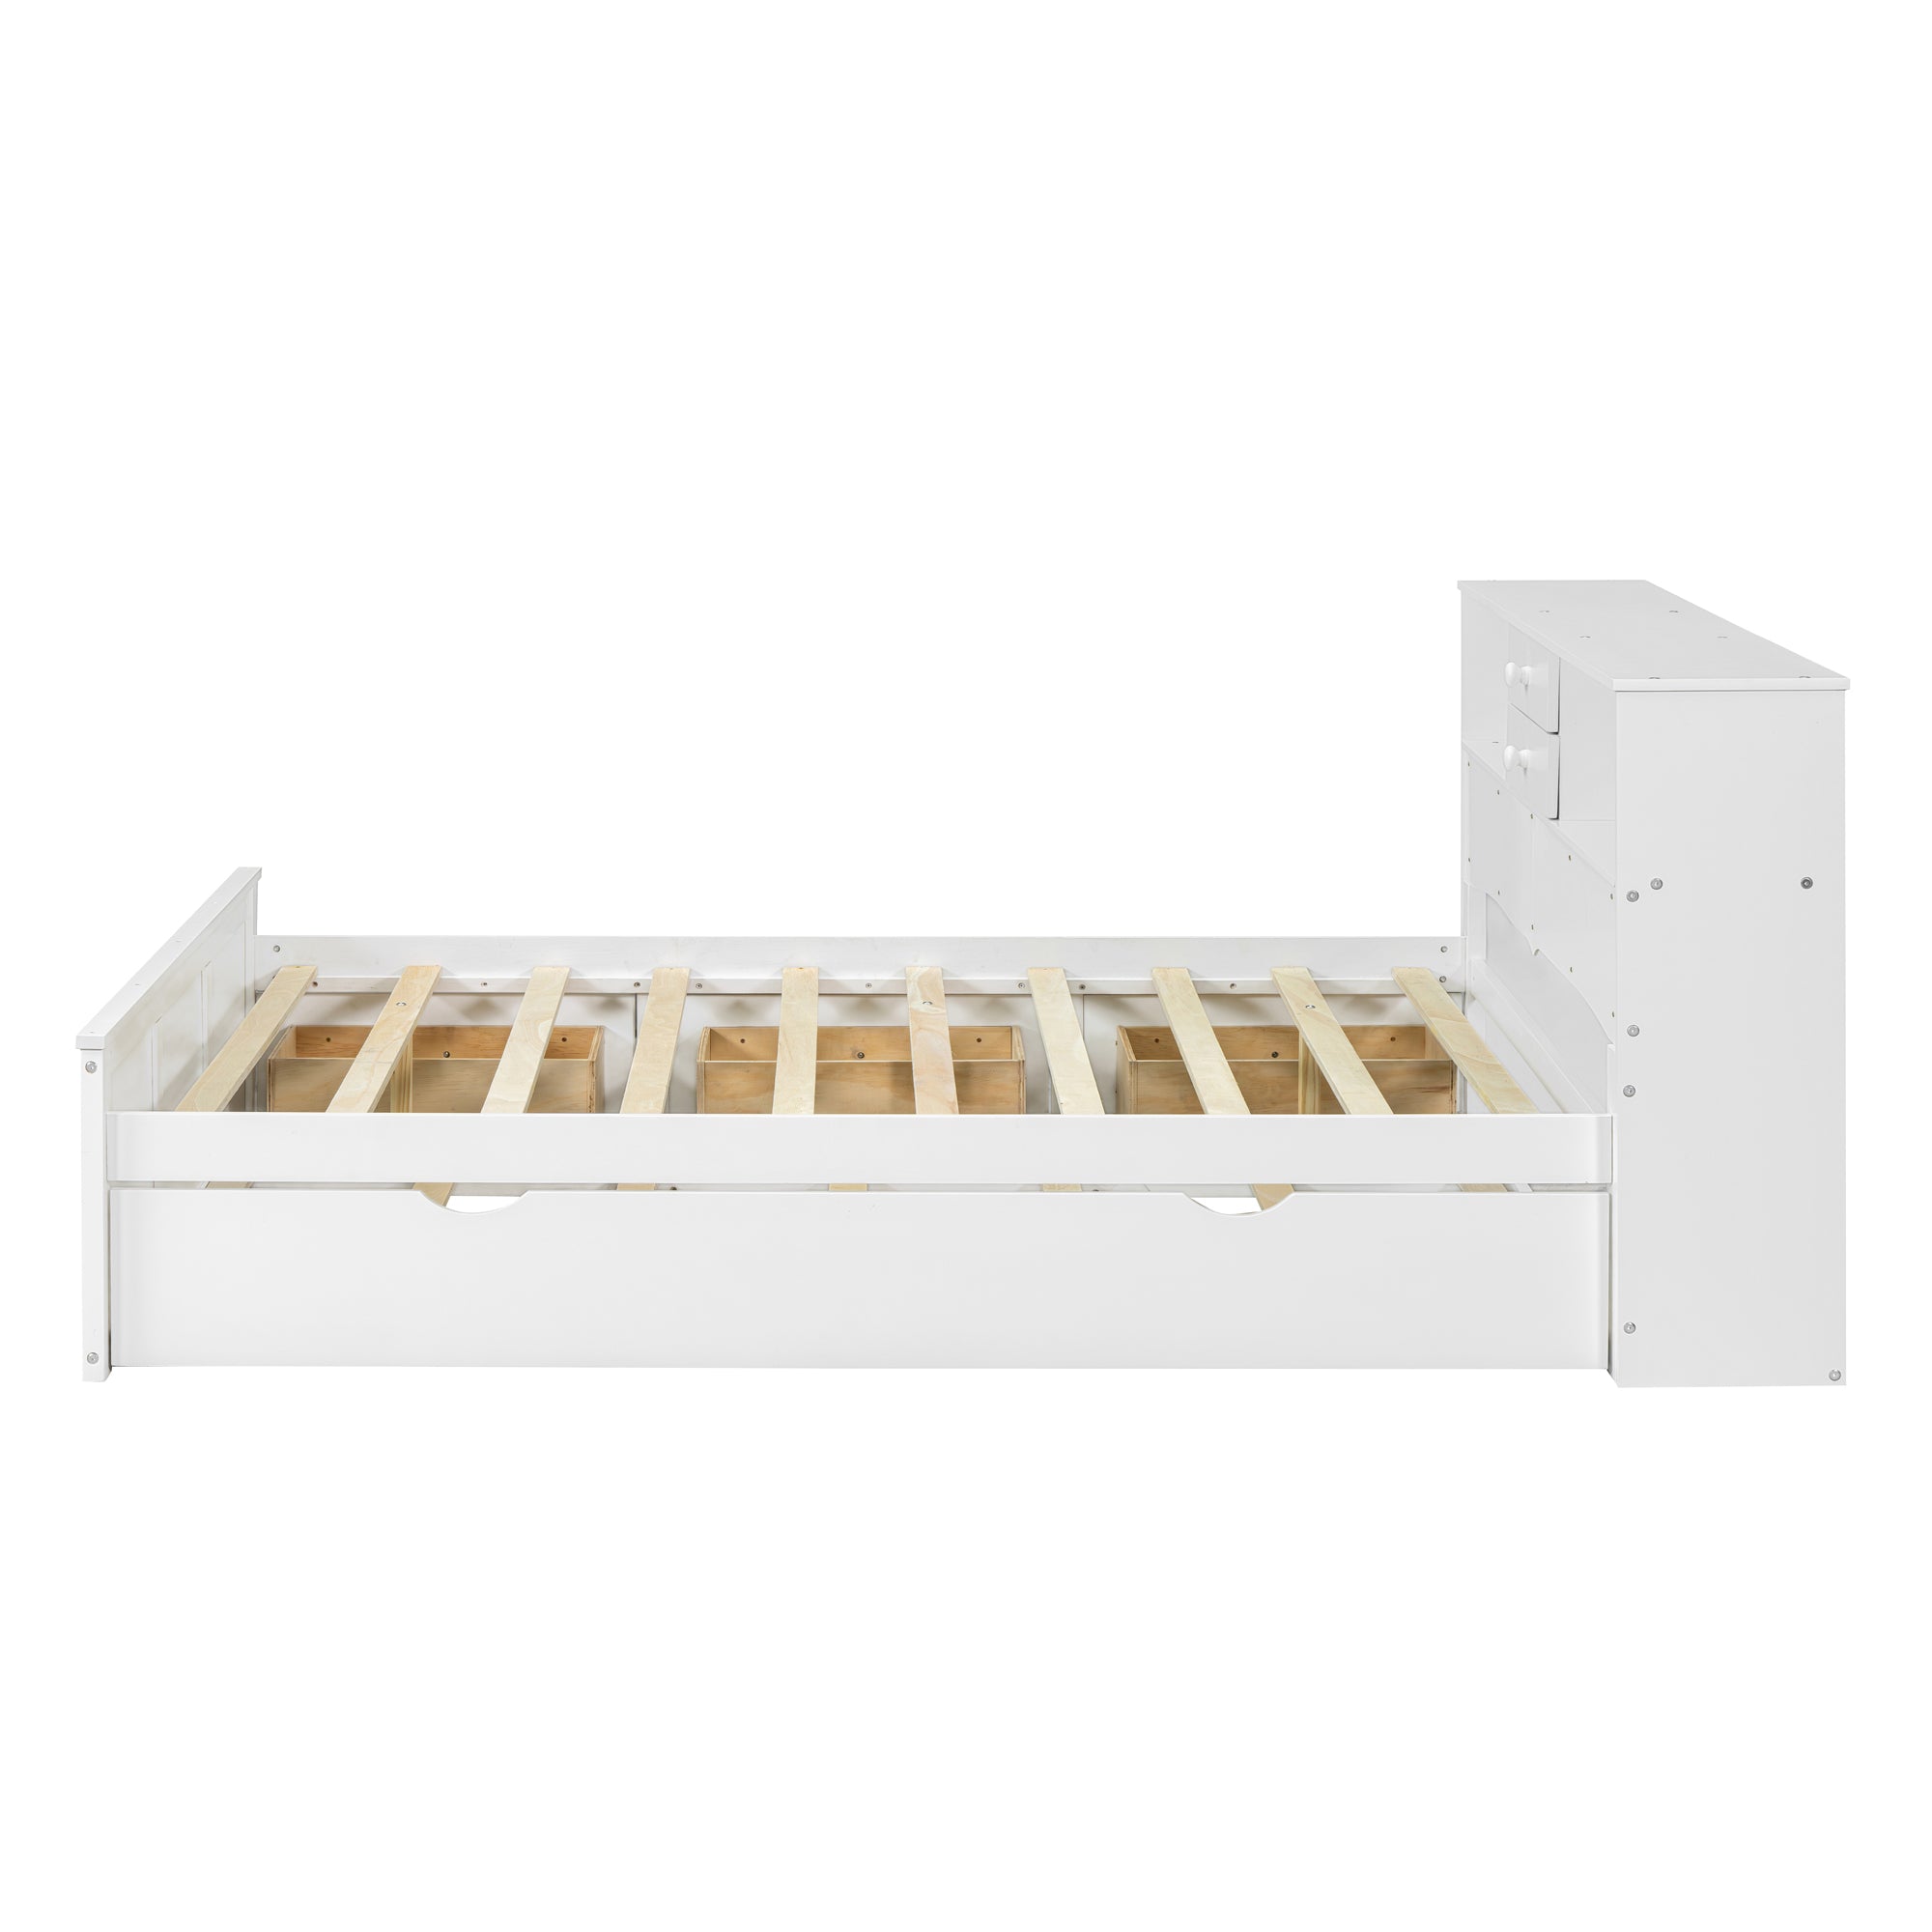 Bellemave Full Size Wood Pltaform Bed with Twin Size Trundle, 3 Drawers, Upper Shelves and A Set of USB Ports & Sockets